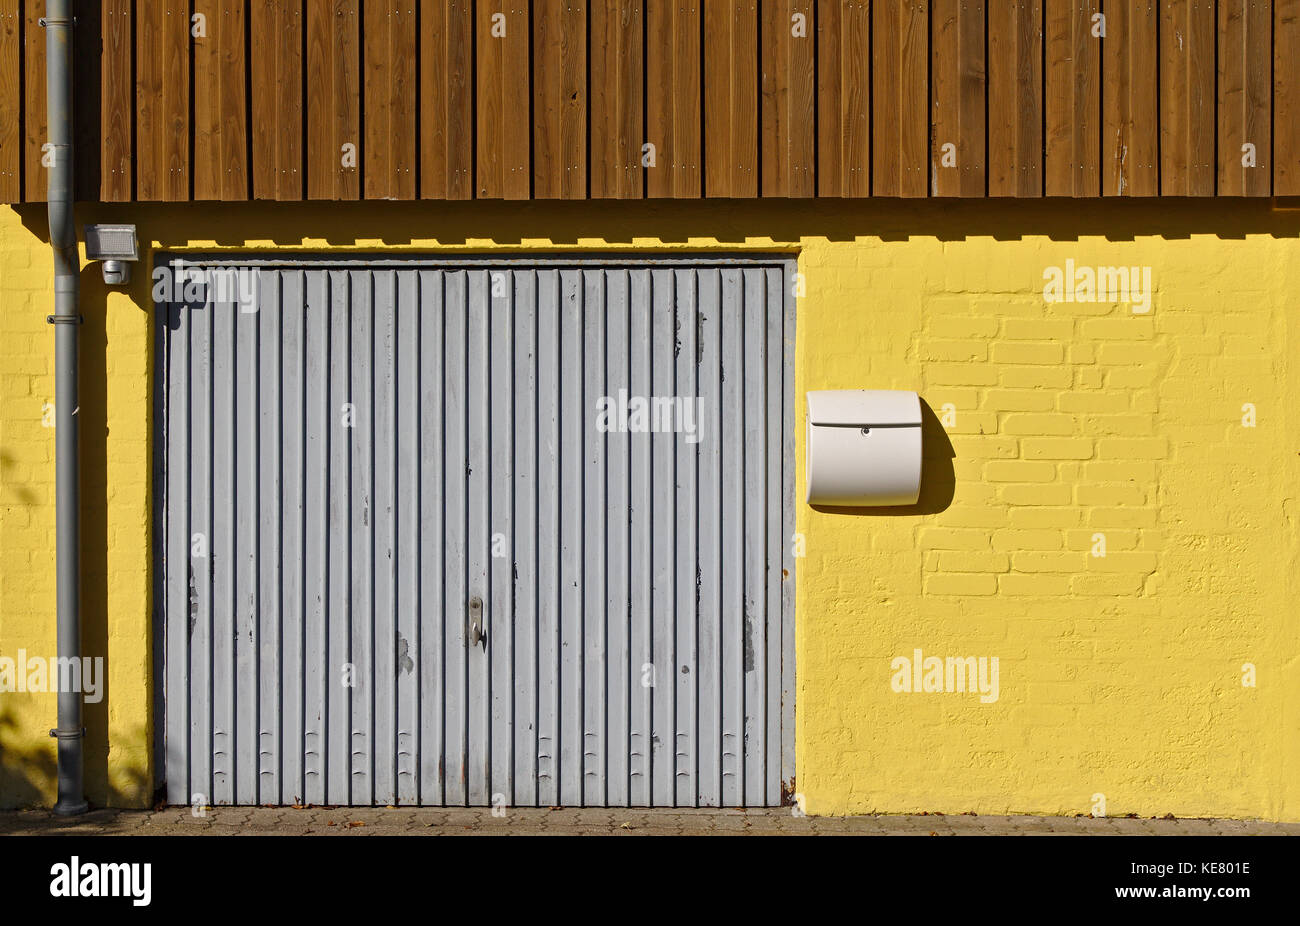 Yellow brick wall with garage door, mail box, downspout and brown wooden paneling on the second floor Stock Photo